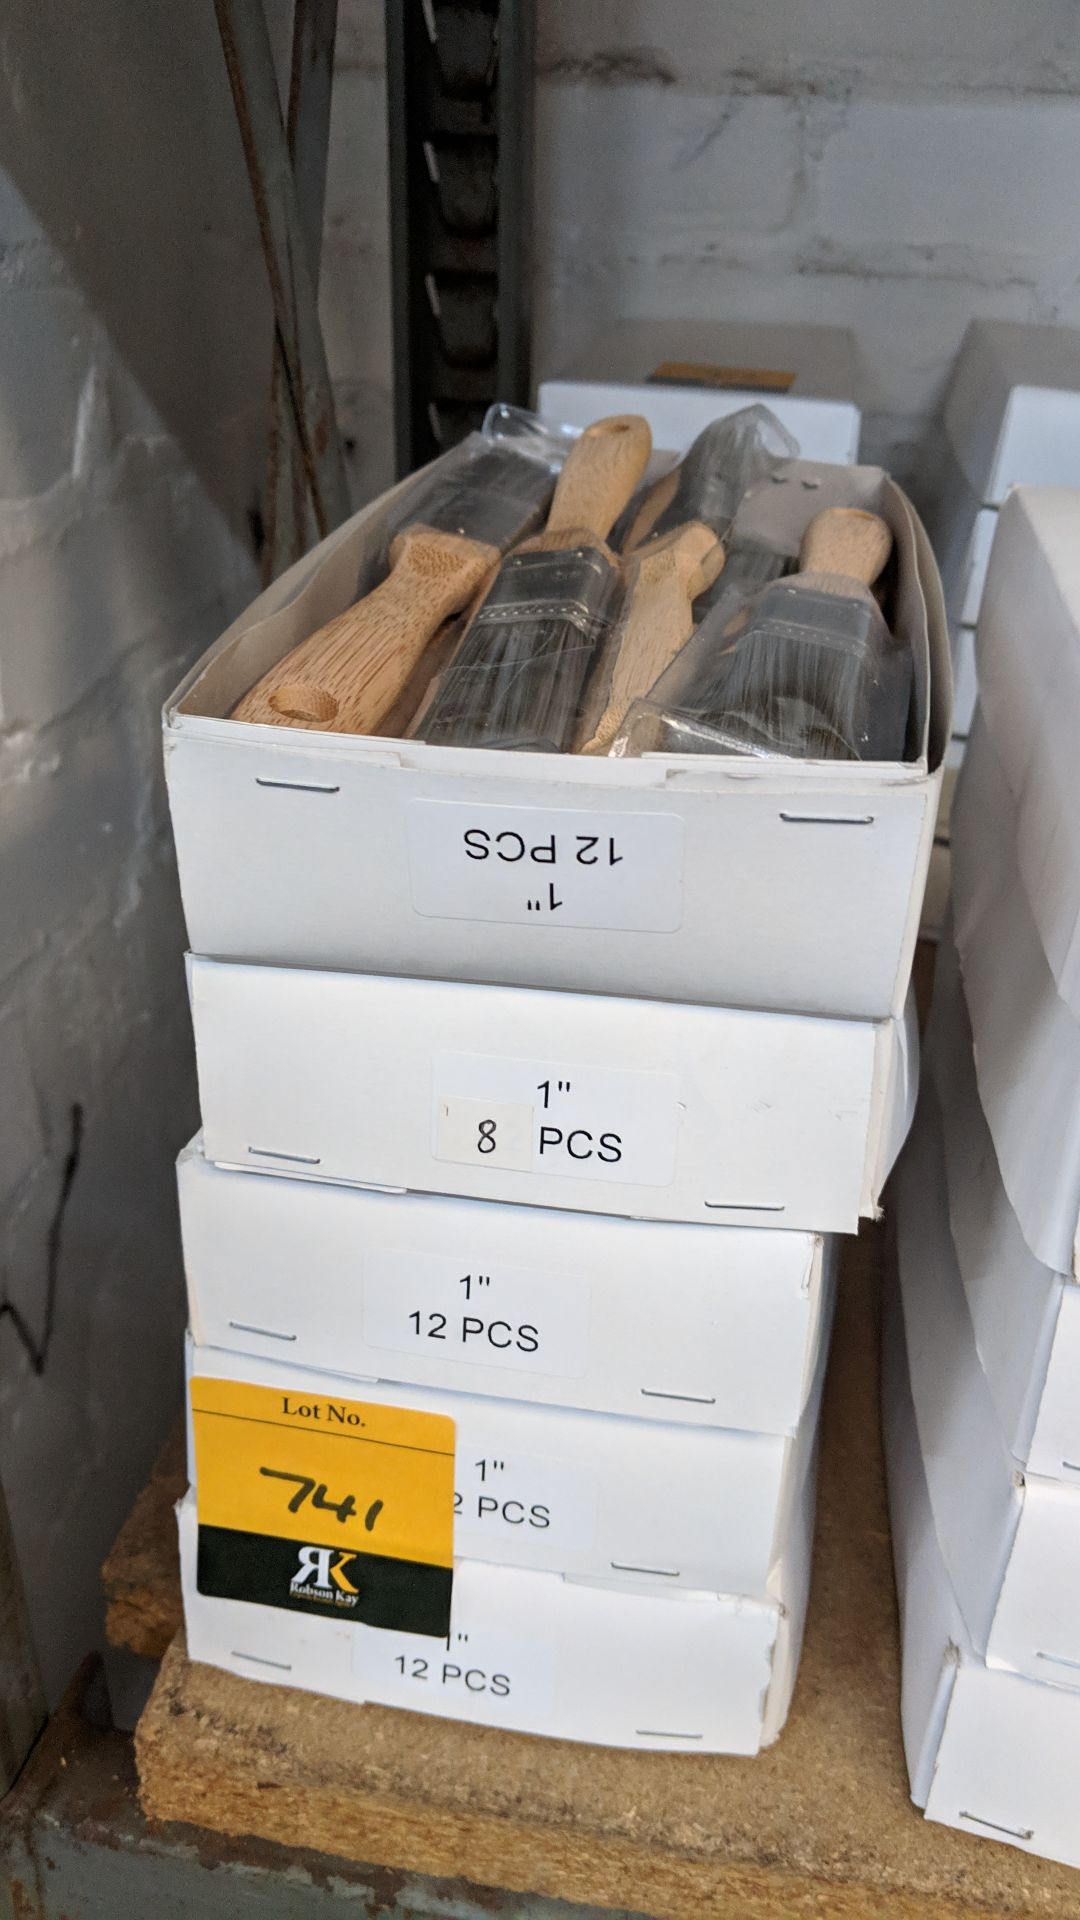 60 off 1" flat paintbrushes This lot is one of a number of lots in this sale which collectively form